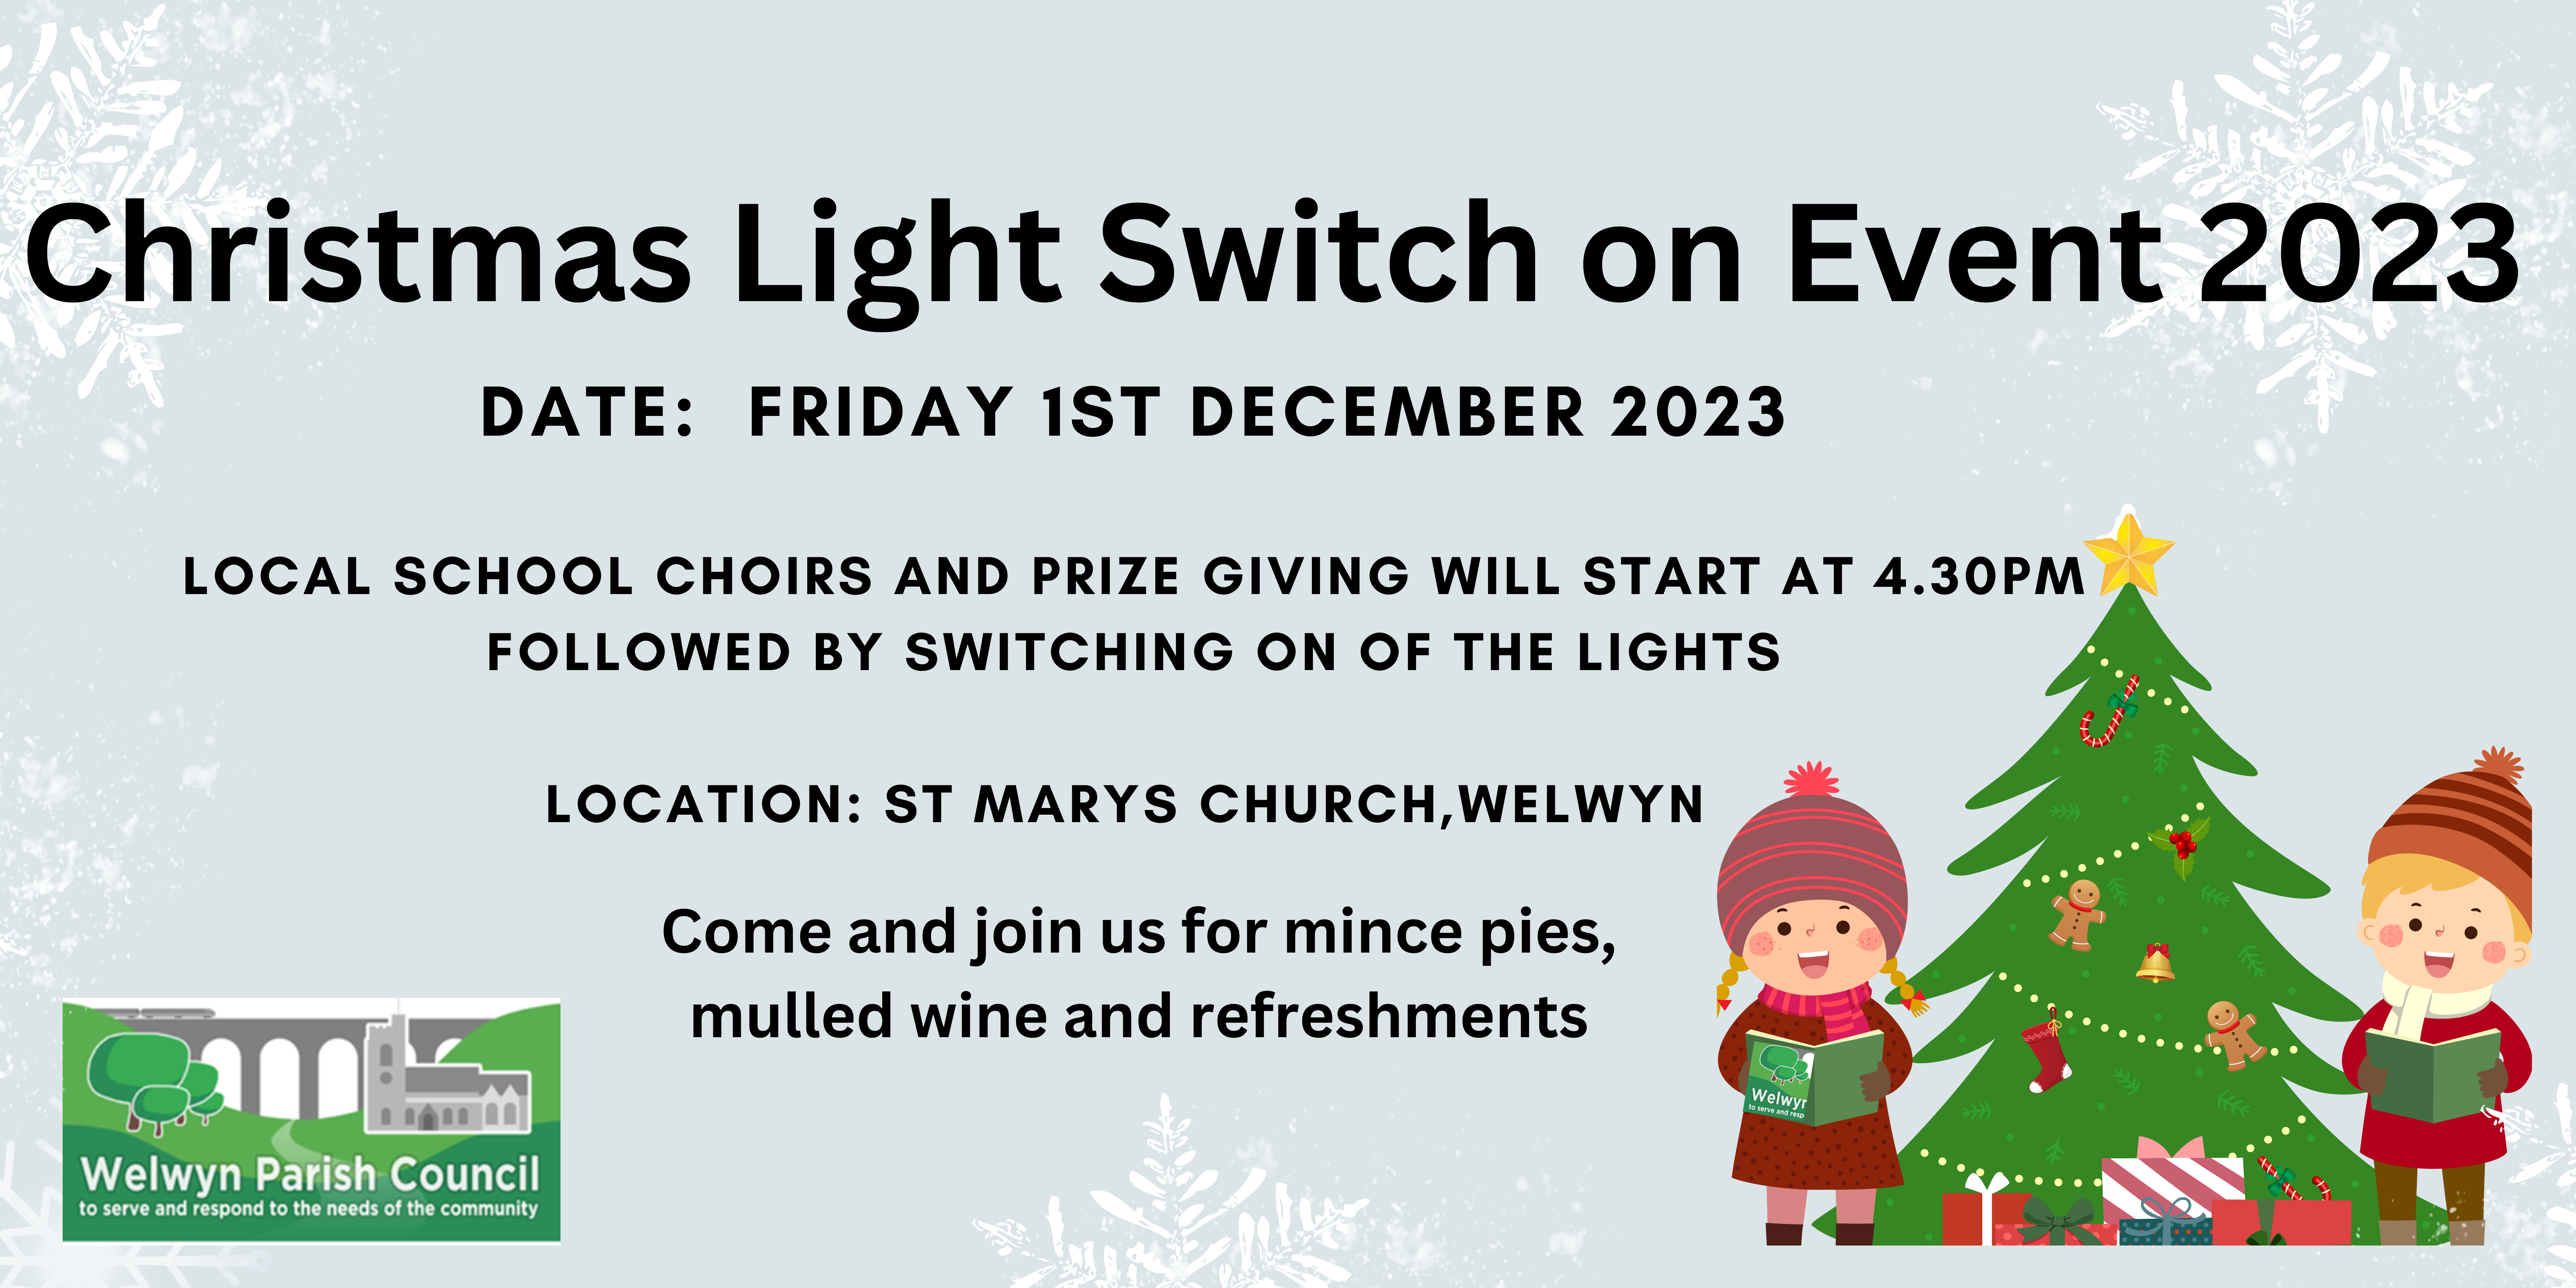 Christmas Light Switch on Event 2023 Date Friday 1st decee,ber 2023 Local Schools Chors Singing from 440 pm LOCATION ST marys SCHurch come join us for mince pie, mould wine and refreshemnts (2)